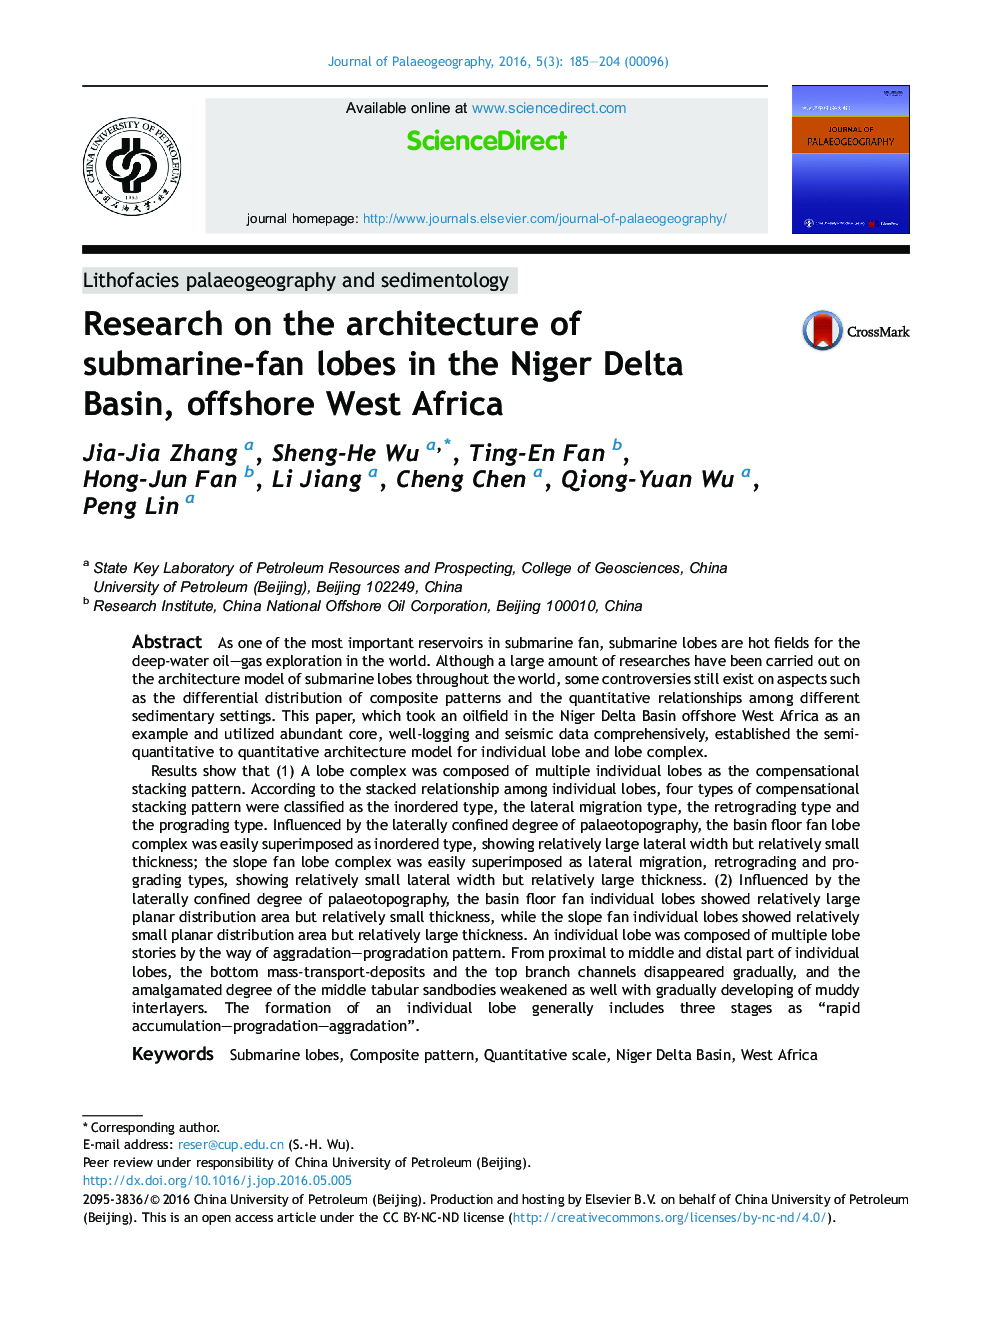 Research on the architecture of submarine-fan lobes in the Niger Delta Basin, offshore West Africa 